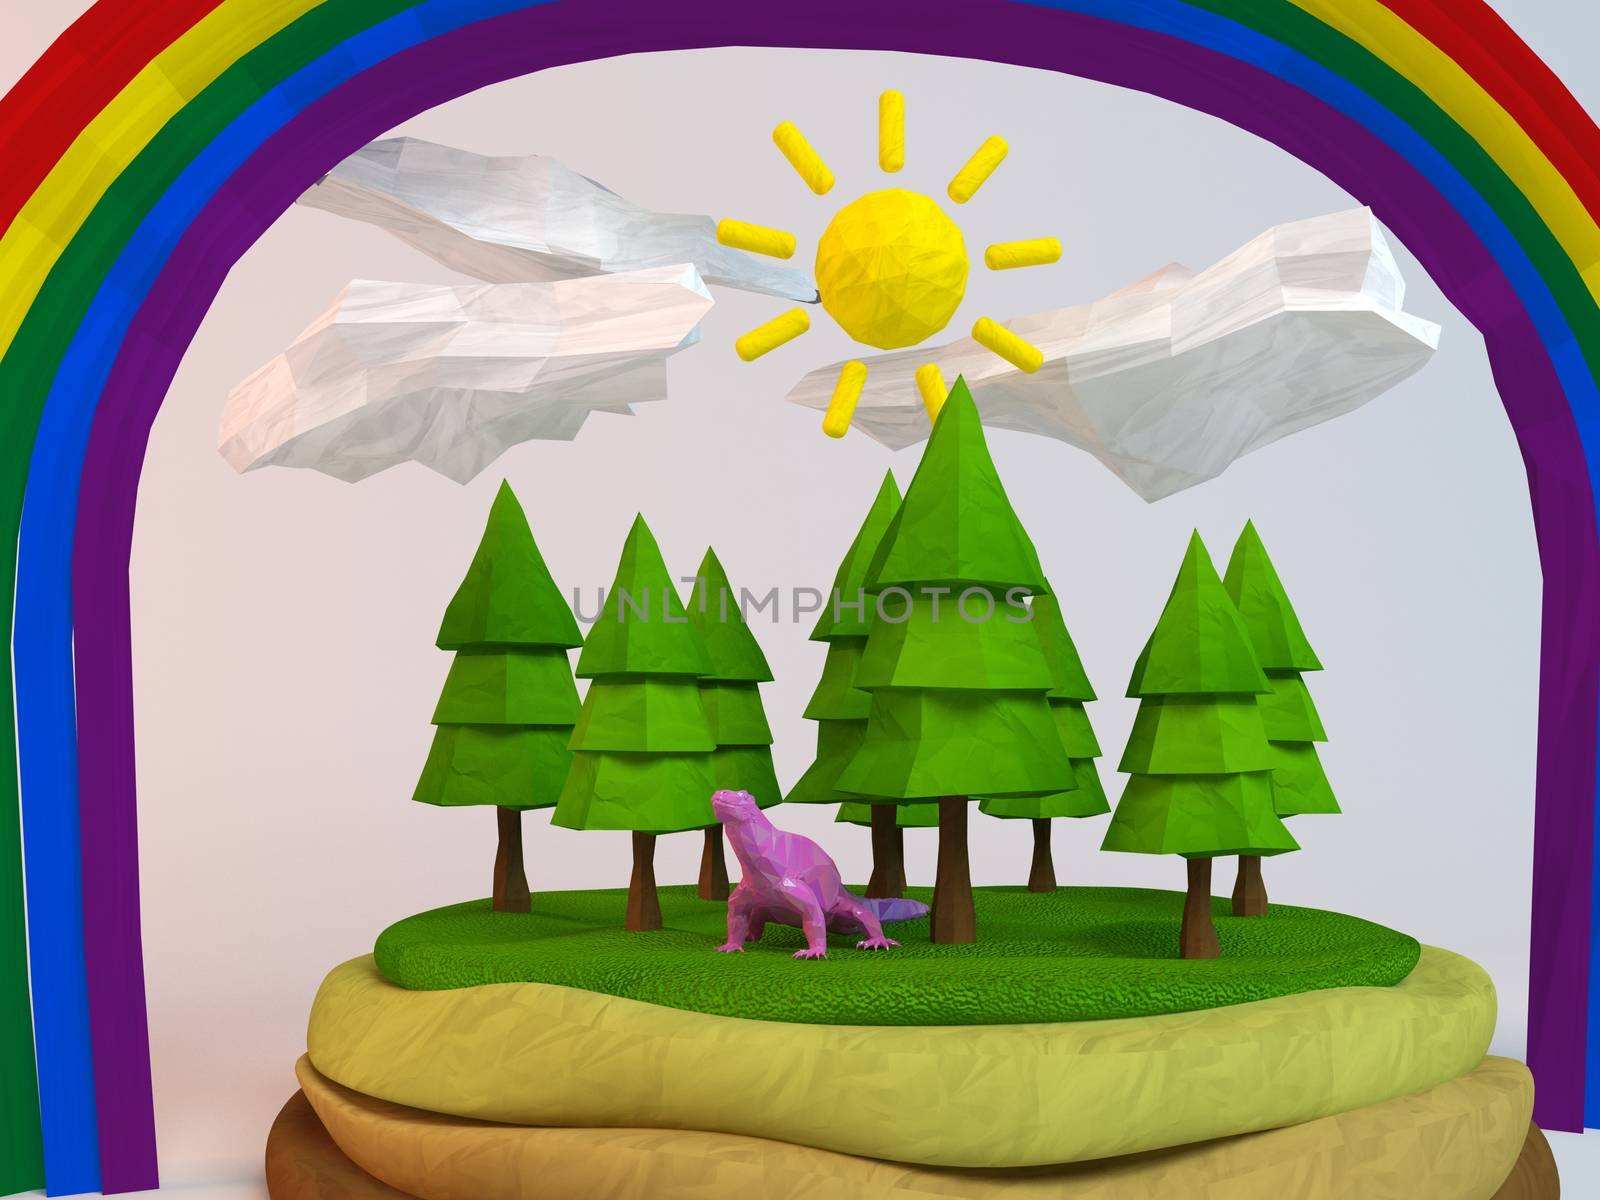 3d lizard inside a low-poly green scene with sun, trees, clouds and a rainbow